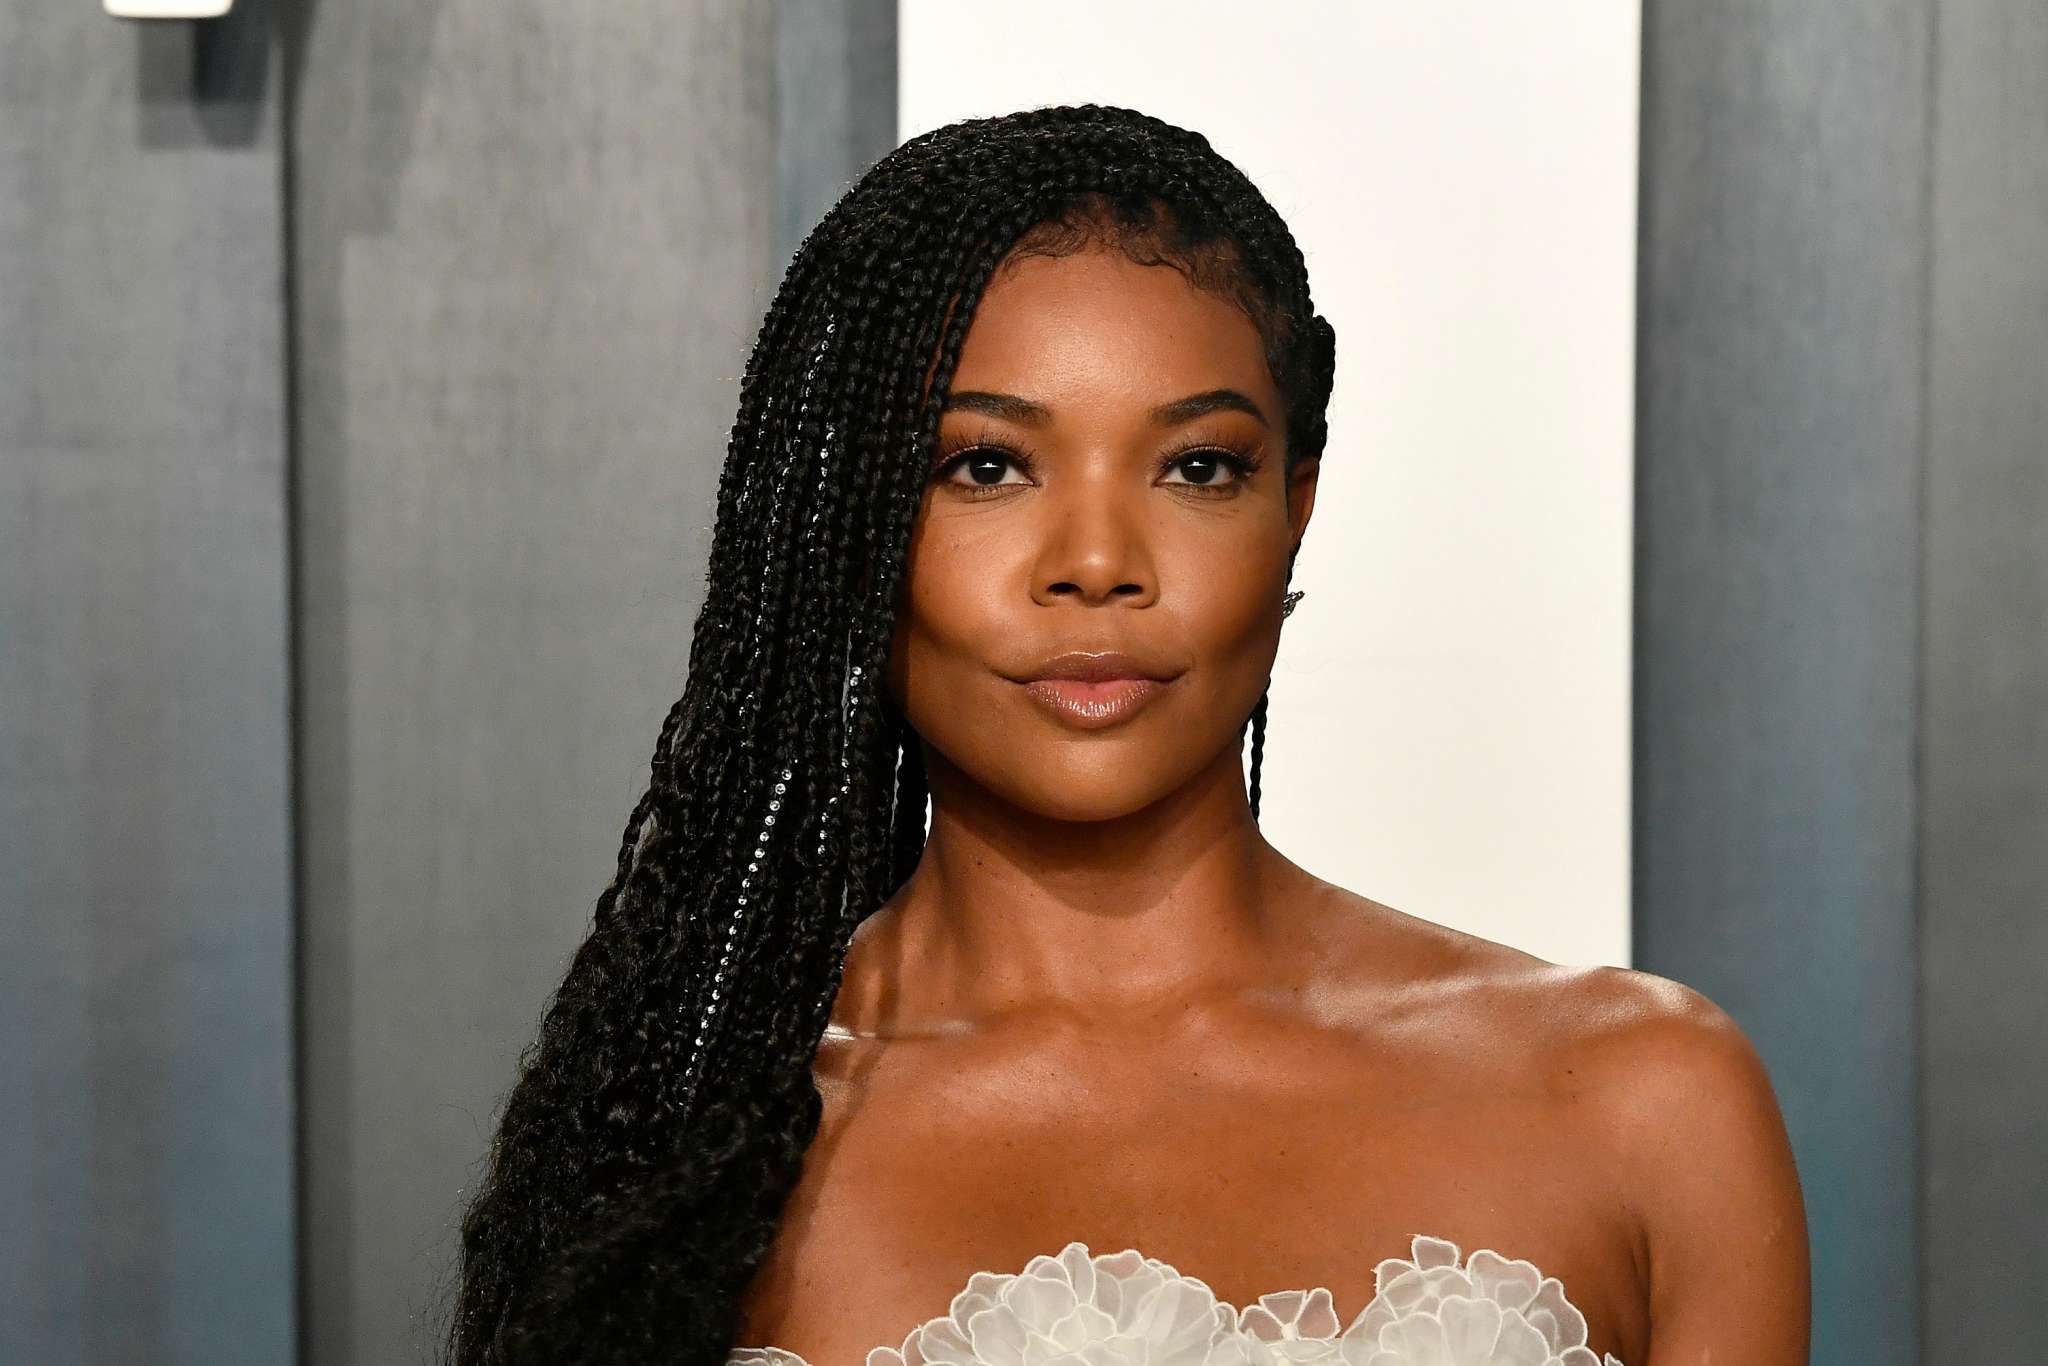 gabrielle-union-is-proud-of-dwyane-wade-and-fans-are-supporting-the-power-couple